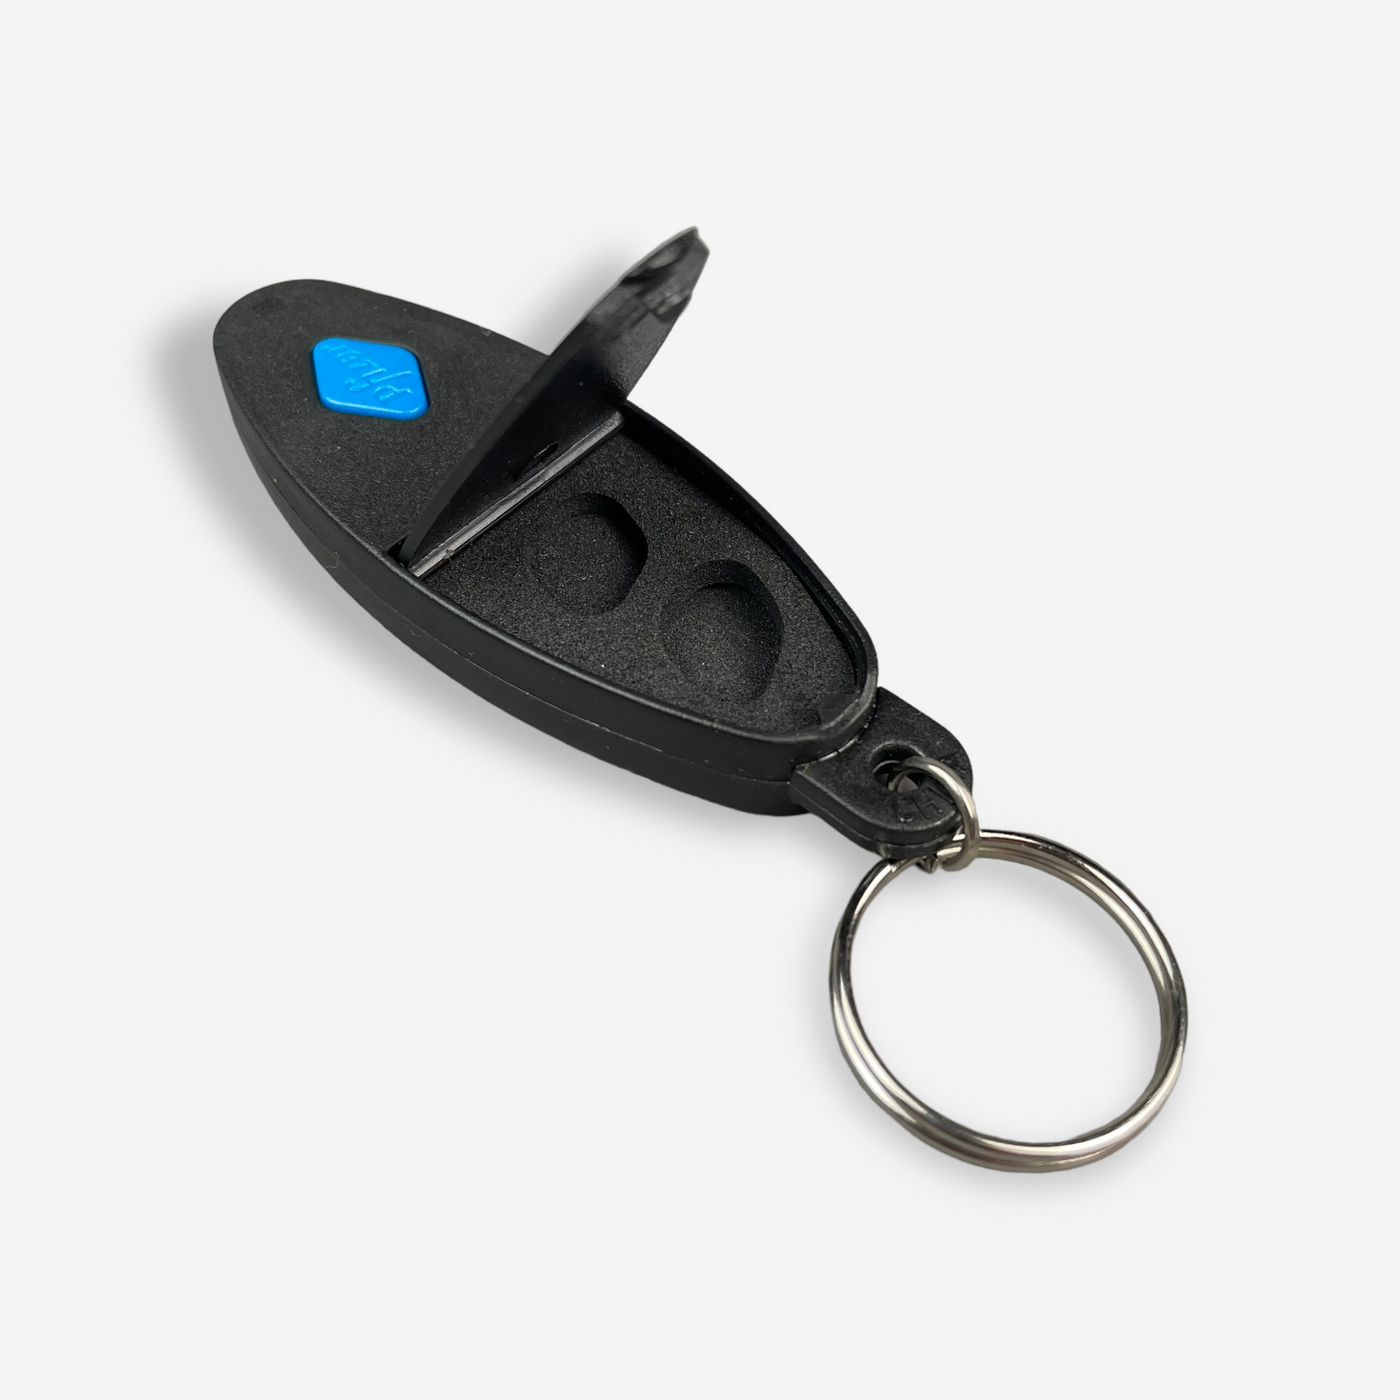 MEARLY 00S VIAGRA KEYRING